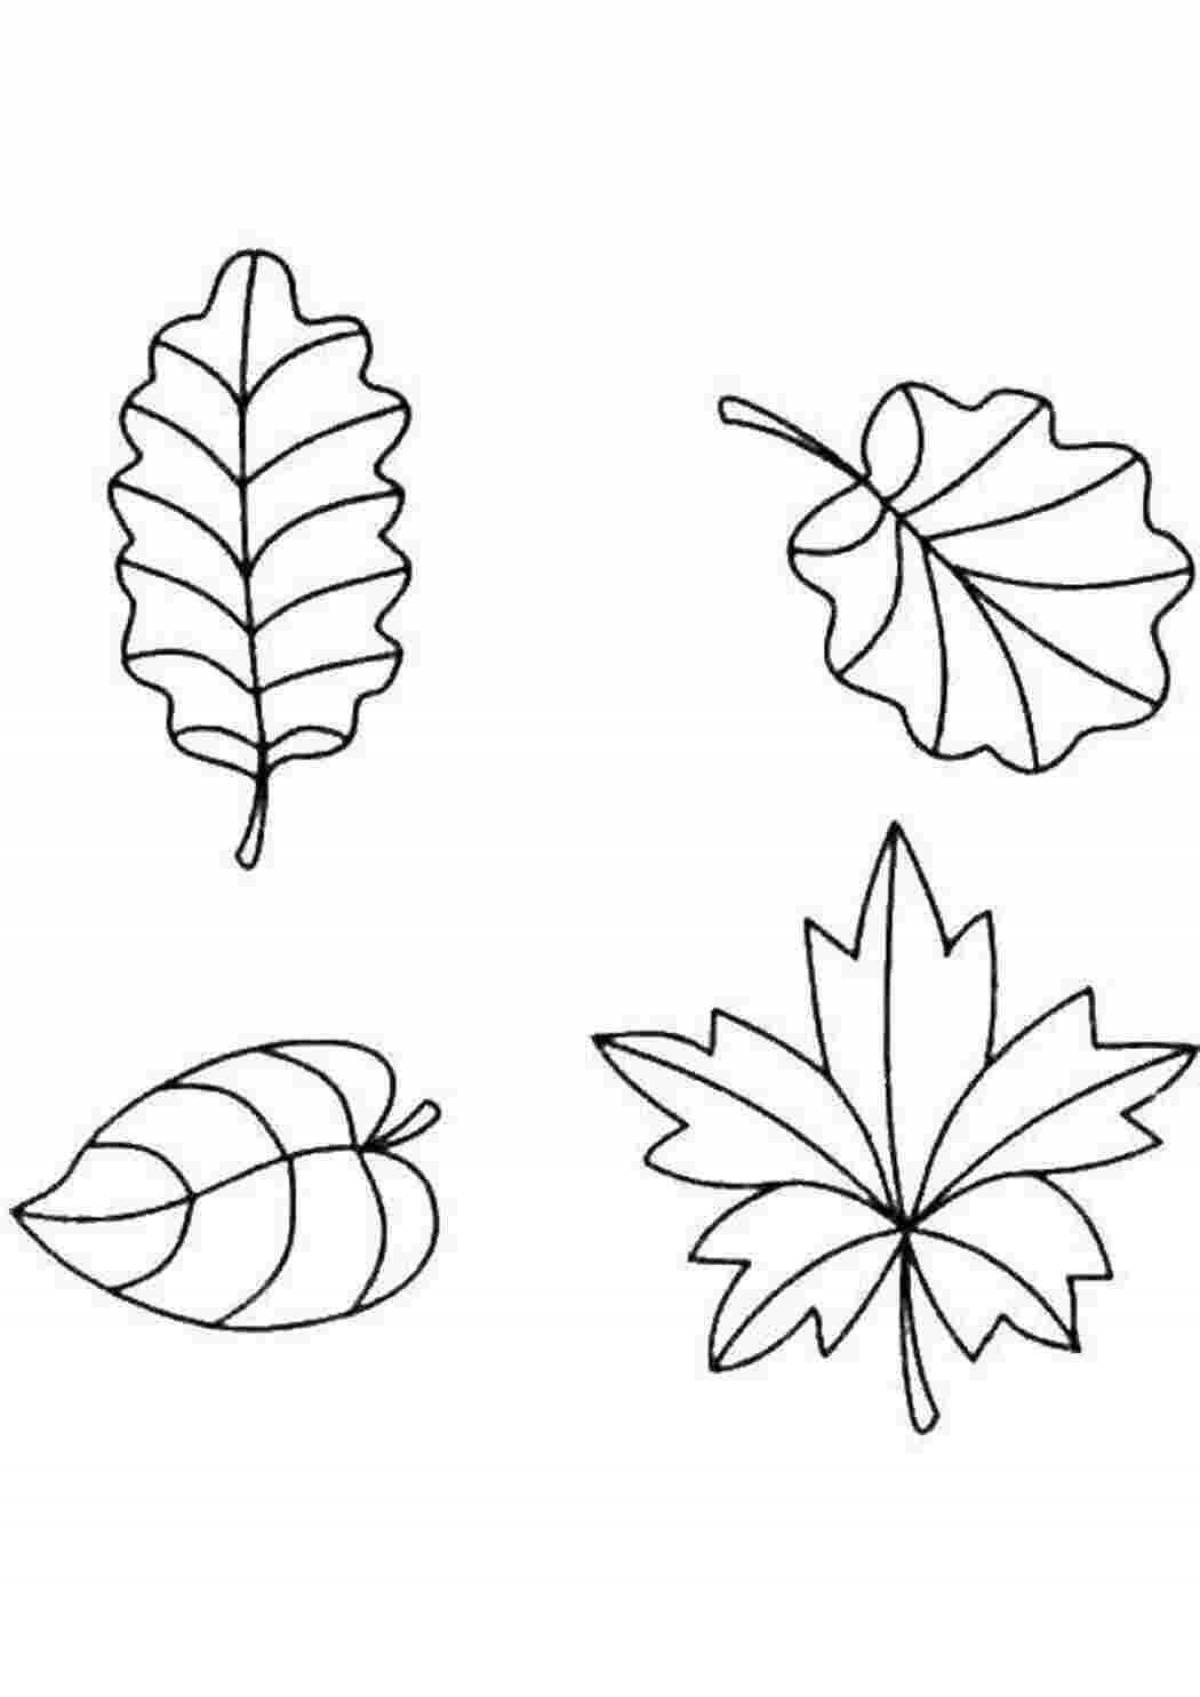 Amazing leaves coloring book for kids